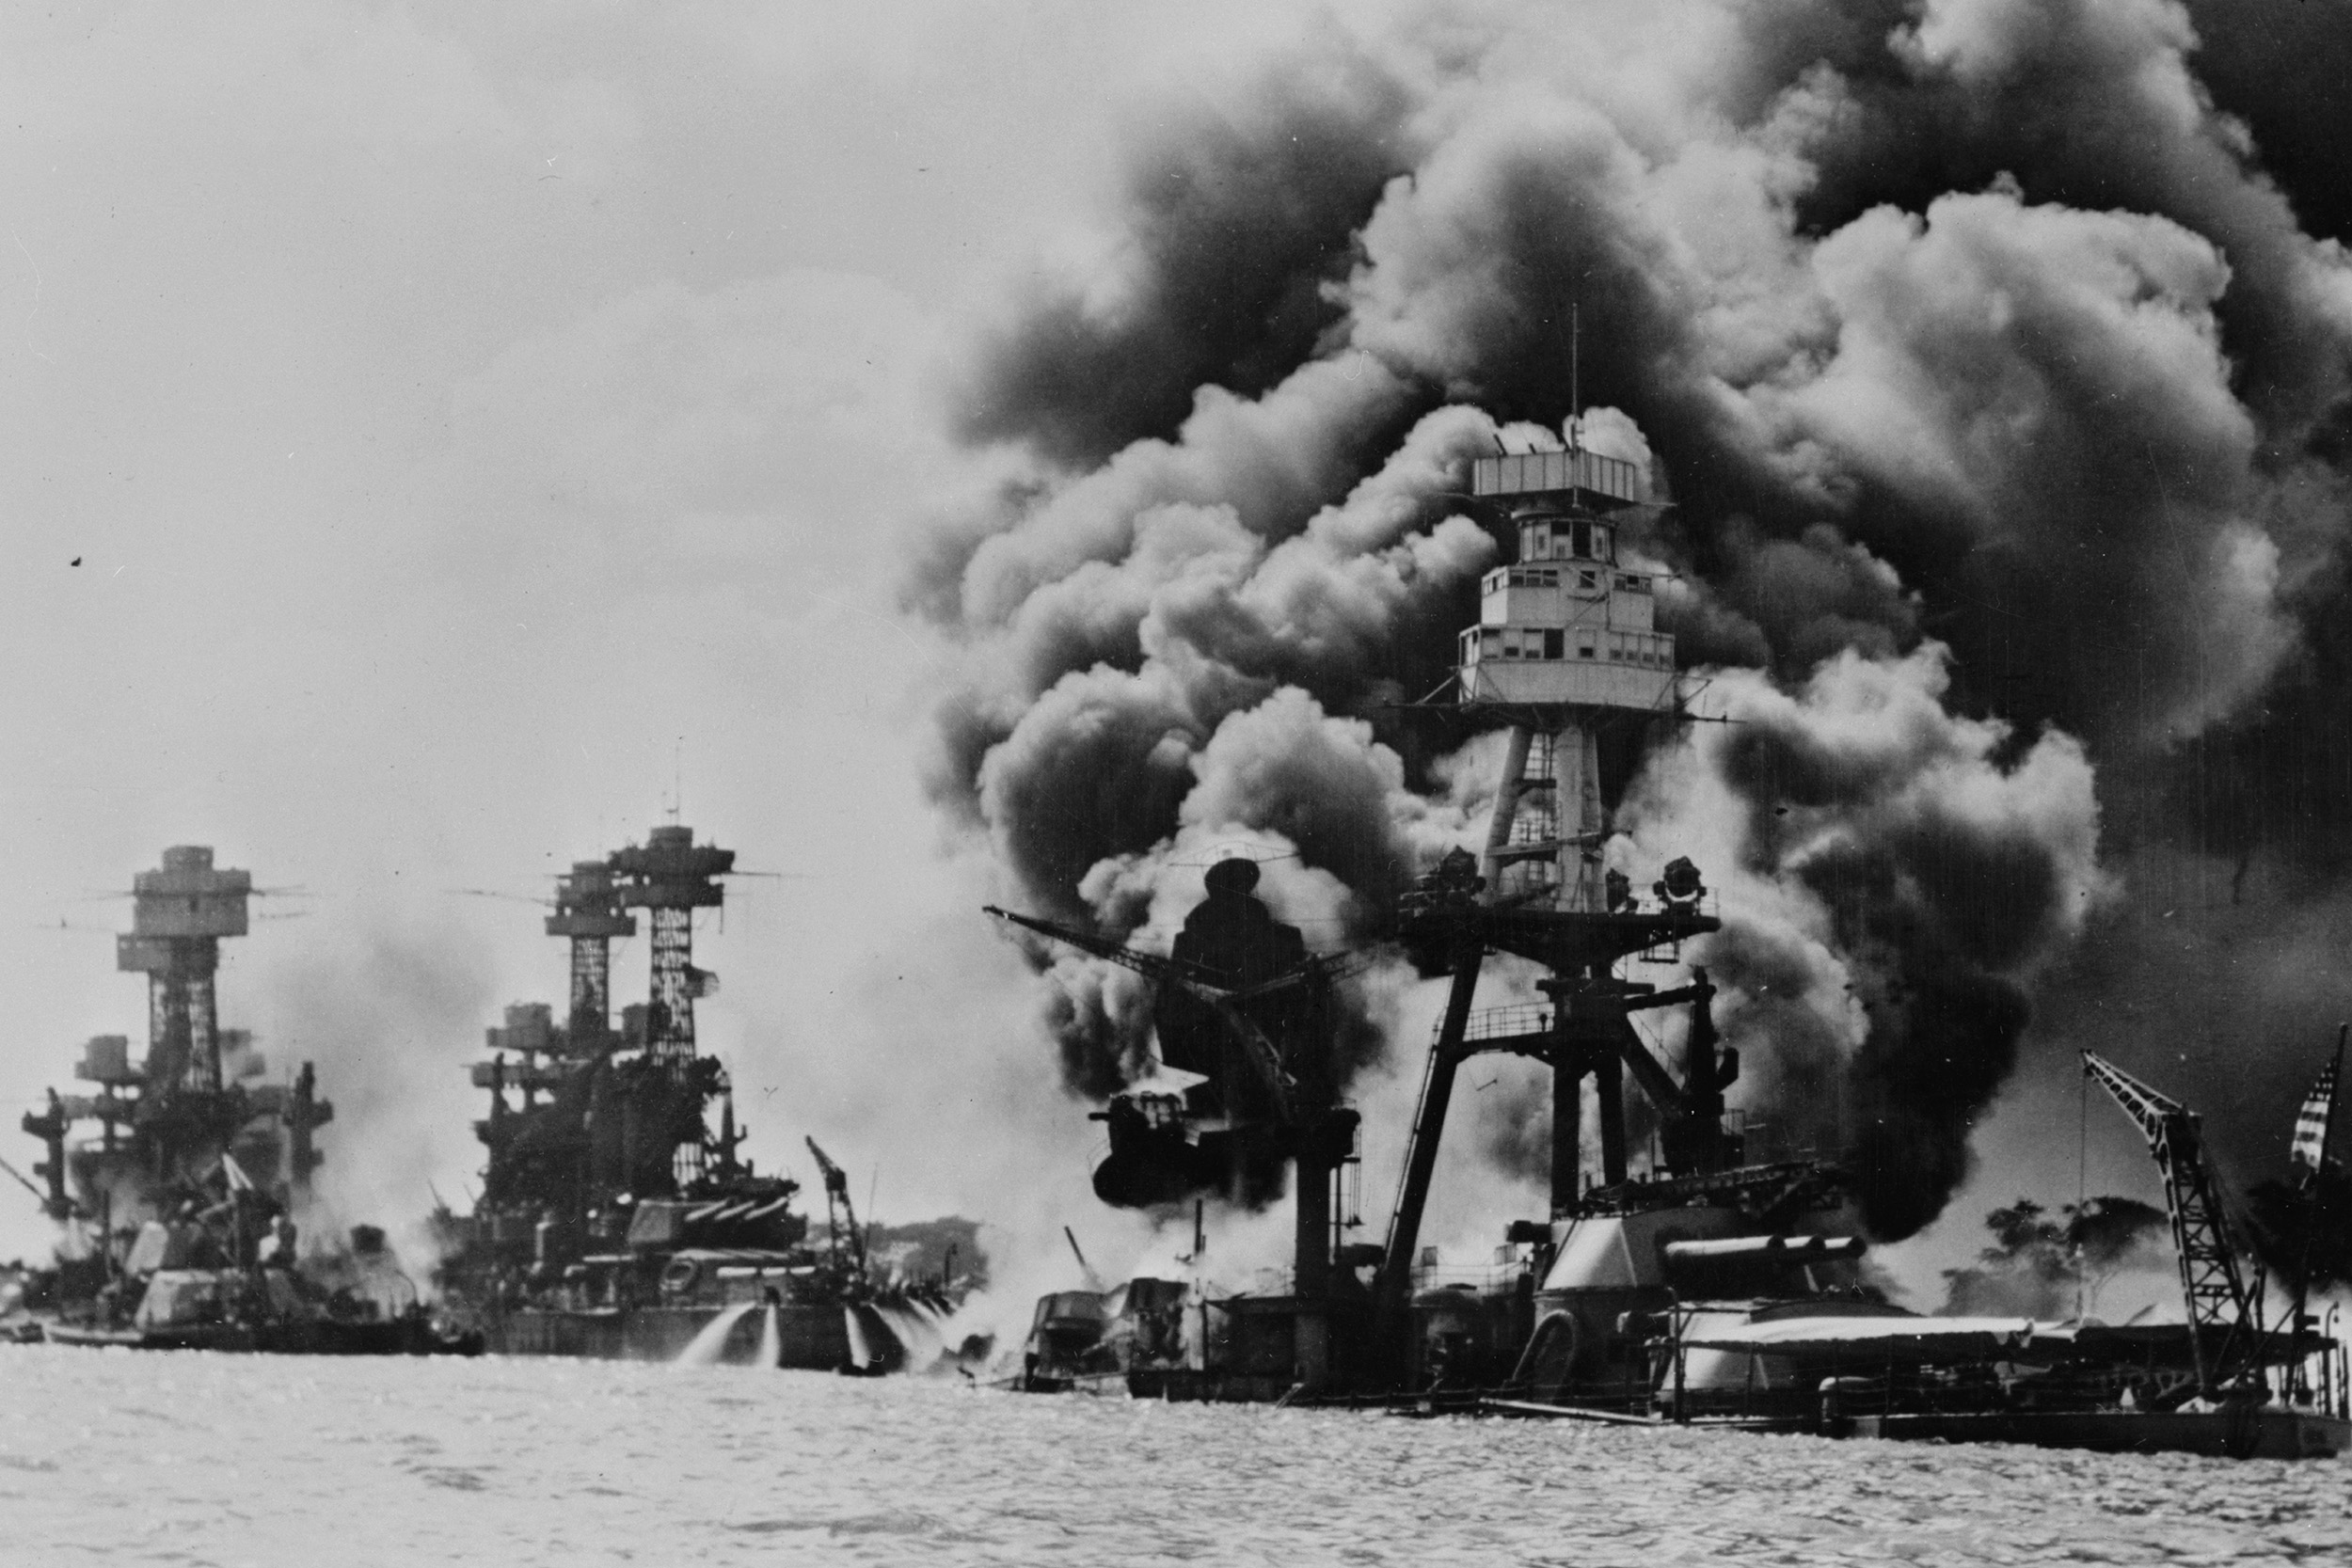 From left, The USS West Virginia was severely damaged; the USS Tennessee was damaged; and USS Arizona sunk during the Japanese attack on Pearl Harbor